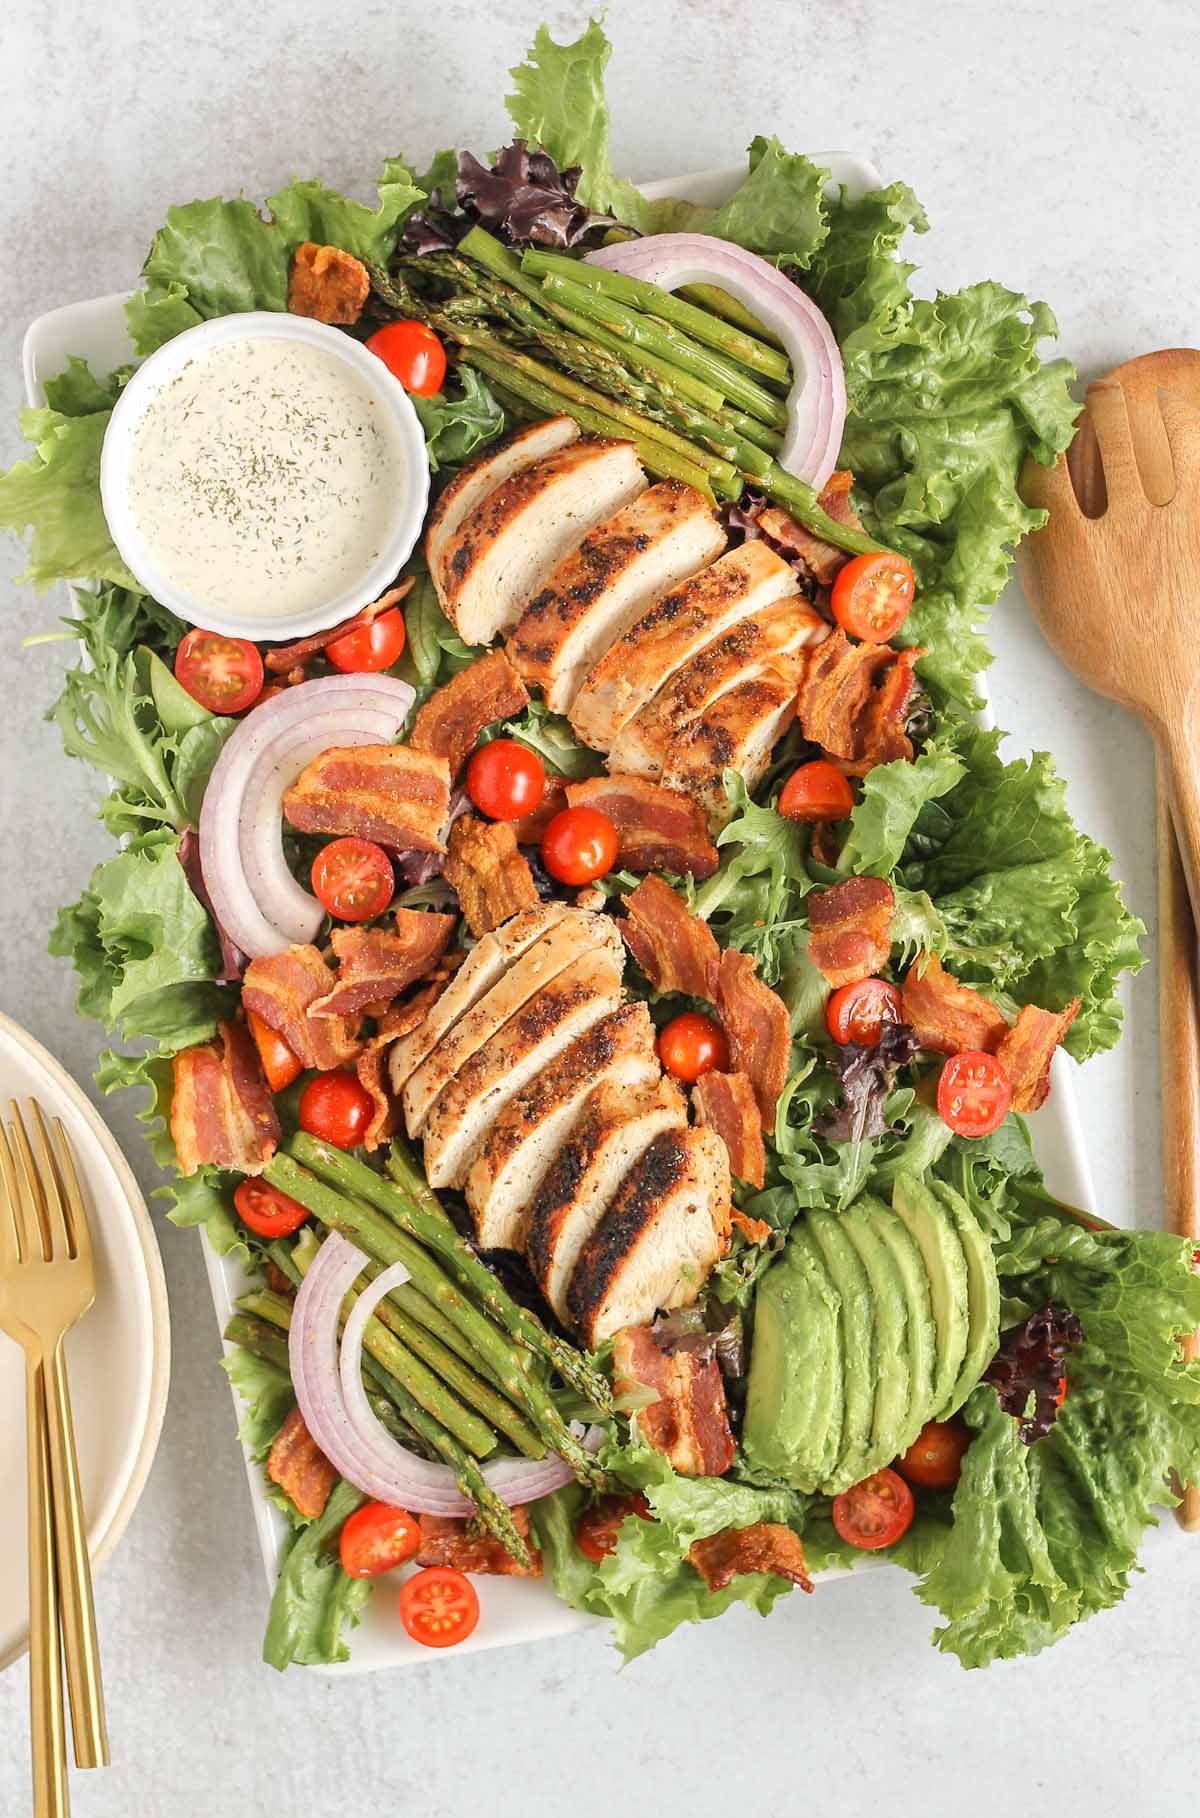 Chicken salad with bacon, cherry tomatoes, red onions, lettuce, asparagus and dressing on a platter.